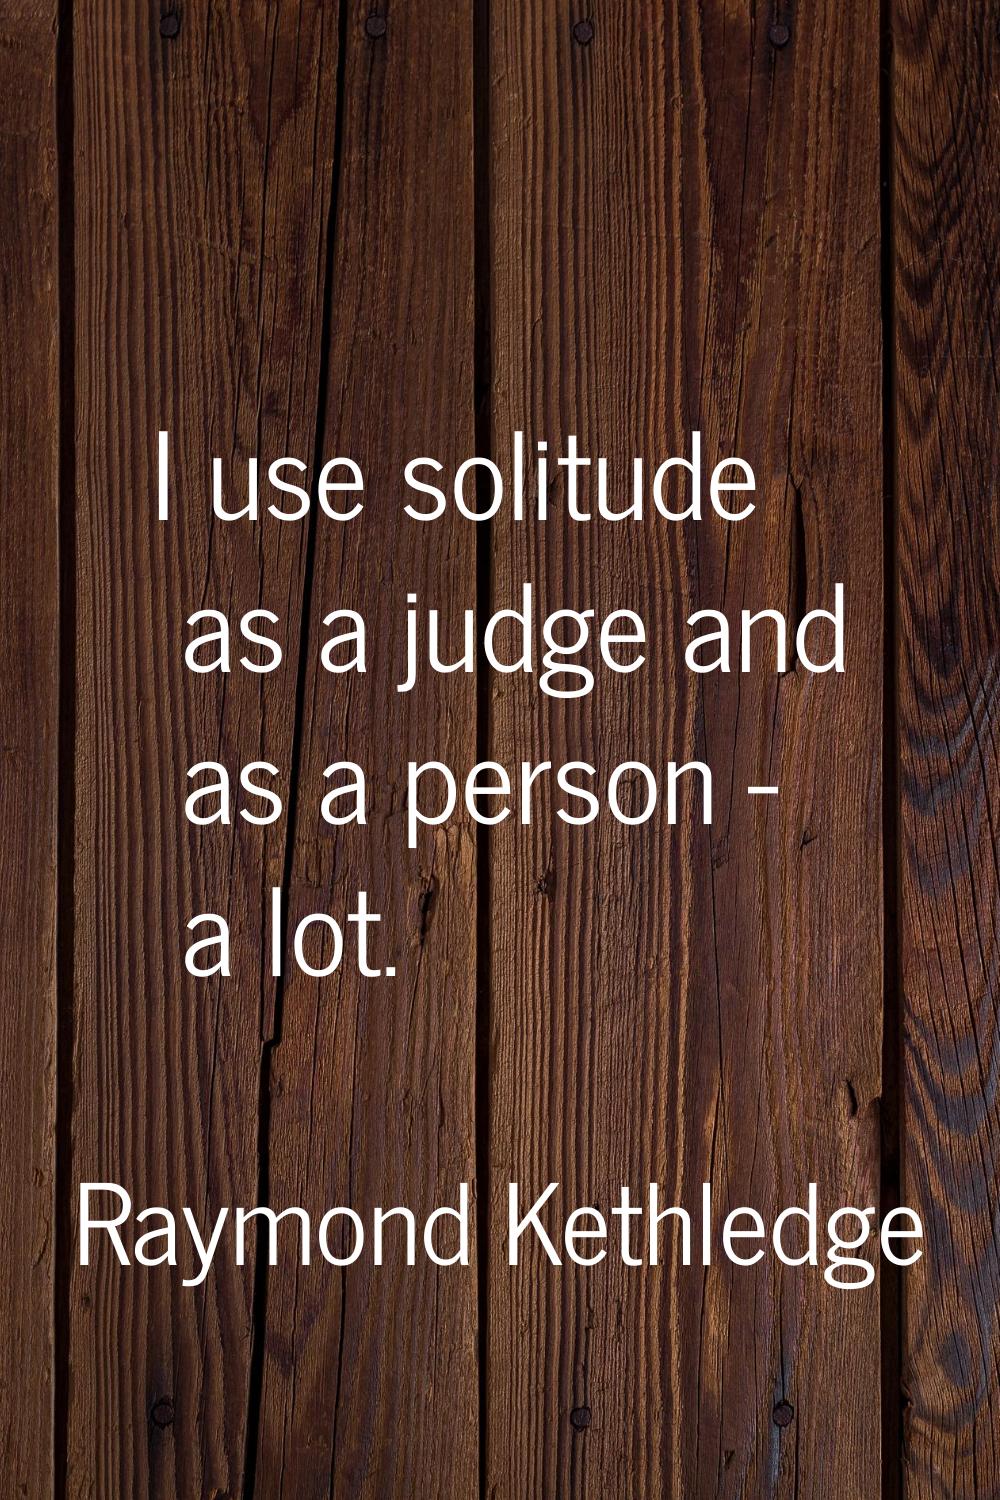 I use solitude as a judge and as a person - a lot.